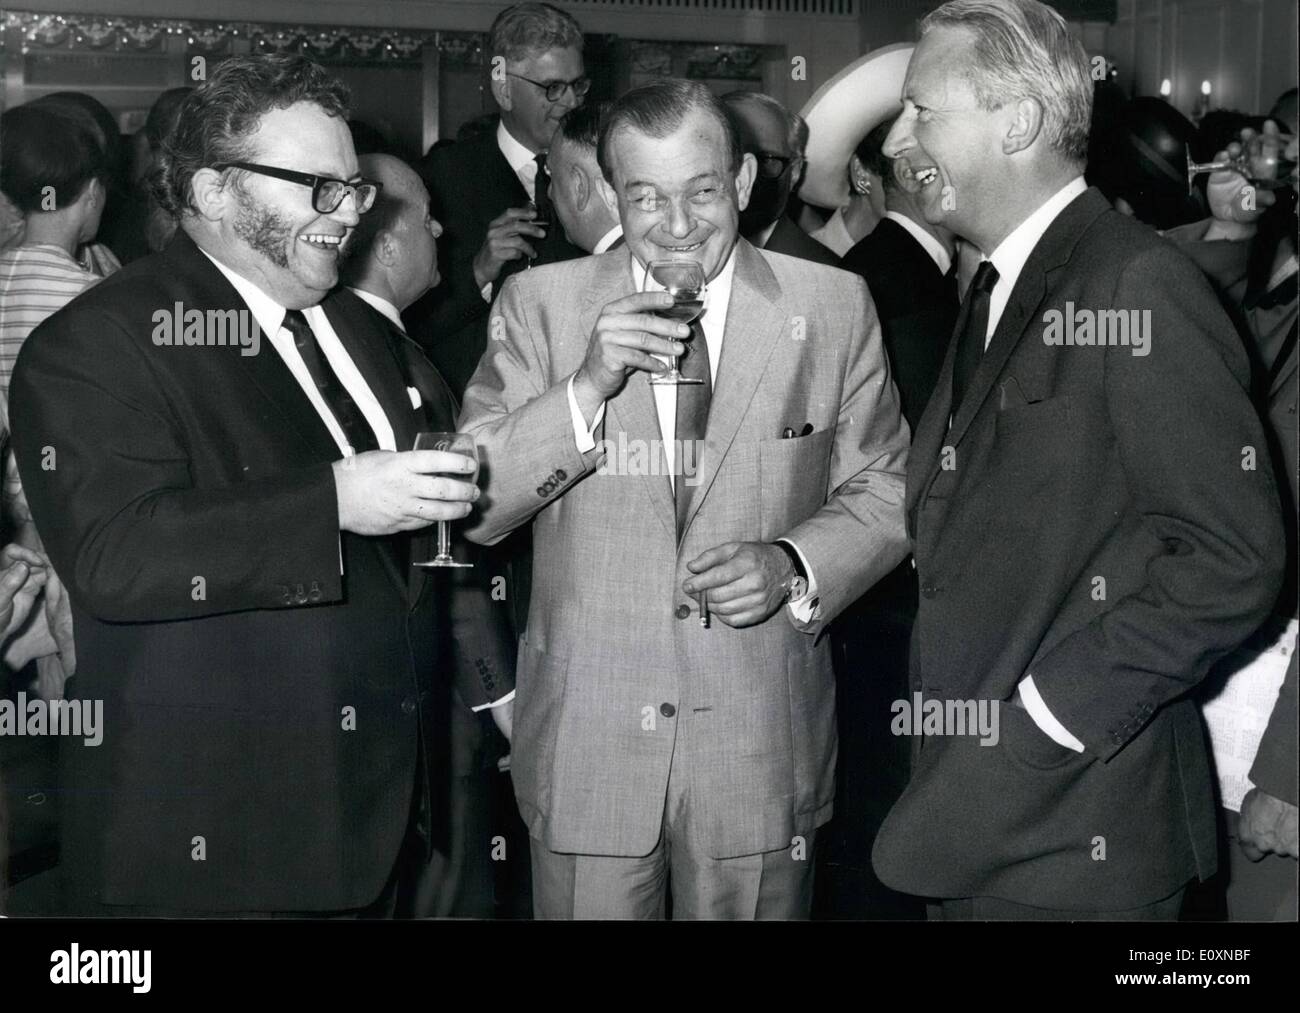 Jun. 06, 1967 - Mr Edward Heath at Variety Club Ladies' Lunch: The Rt. Hon. Edward Heath, M.P., leader of the opposition, was guest of Honour at the variety club of Great Britain's Ladies' Luncheon, at the Dorchester Hotel, Park Lane, London, today. The annual lunch is the only one of the year to which Variety members may invite ladies, all of whom receive a gift of beauty requisites. Photo shows (L. to R.), Comedian Harry Secombe, H.E. Aharon Remez, the Israeli Ambassador, and Edward Heath M.P., Leader of the opposition, share a joke together at the luncheon today. Stock Photo